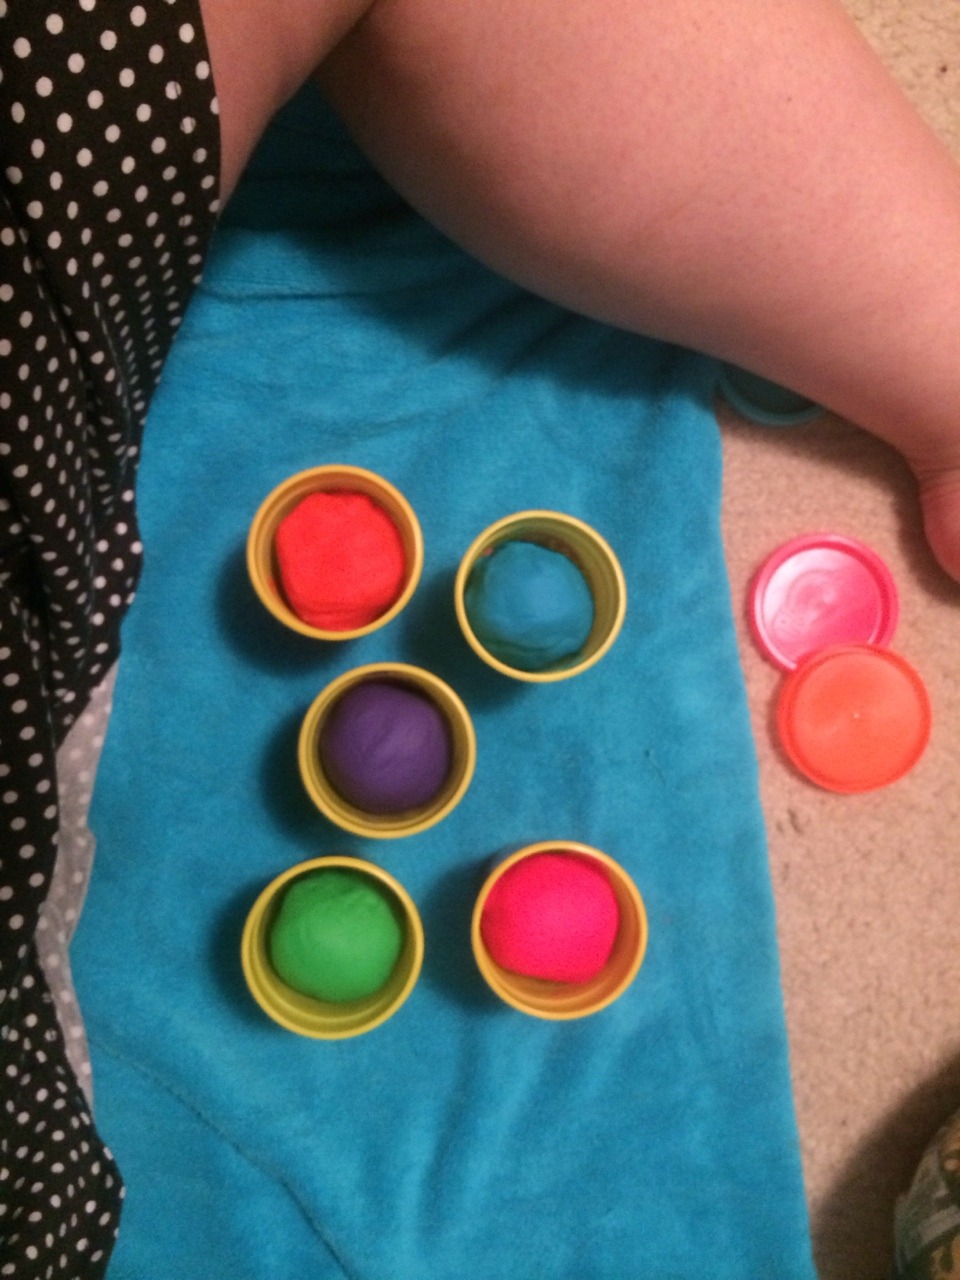 Daddy bought me my first set of play-doh!!! Yay!!!